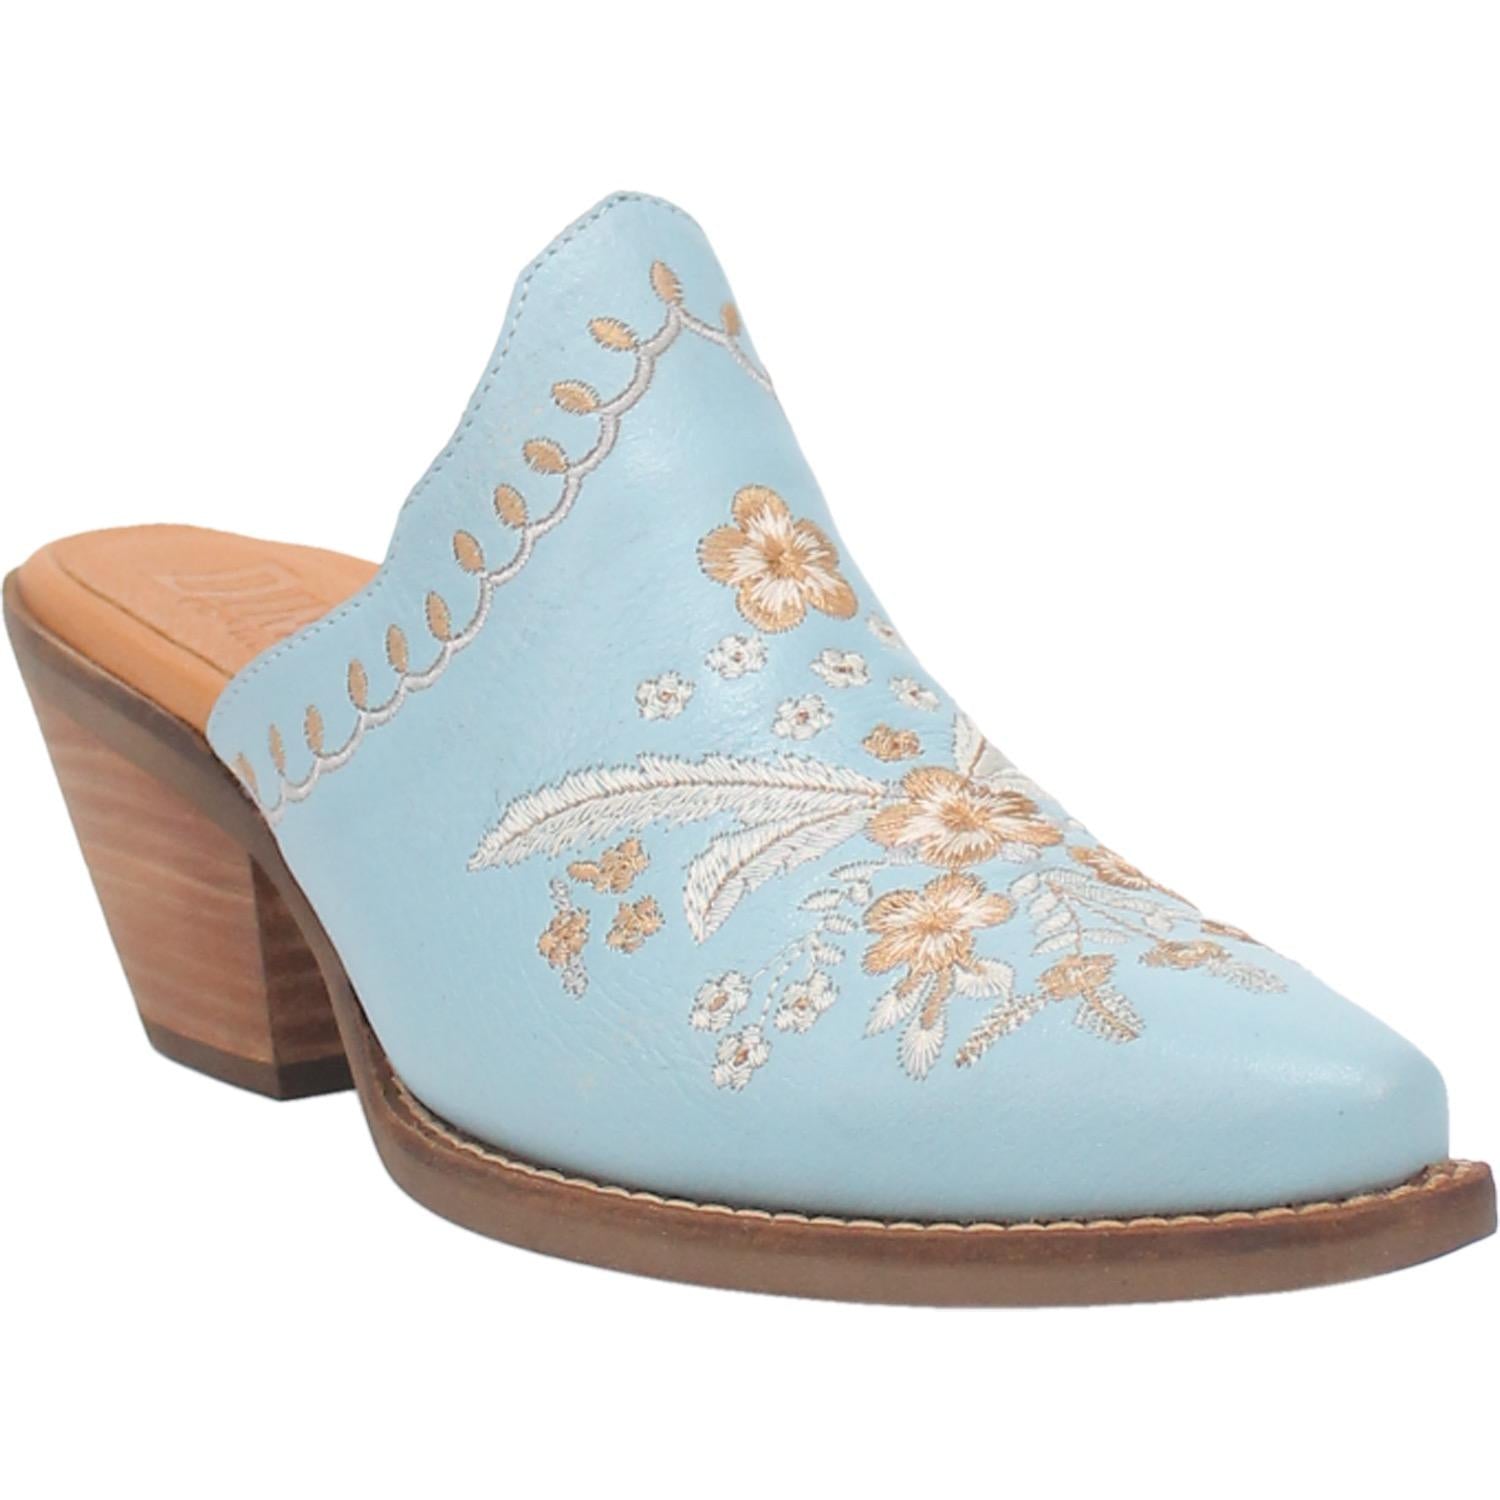 A blue bootie with a white and cream floral and feather design on the upper, a white and cream stitched design on the edge, and a short heel